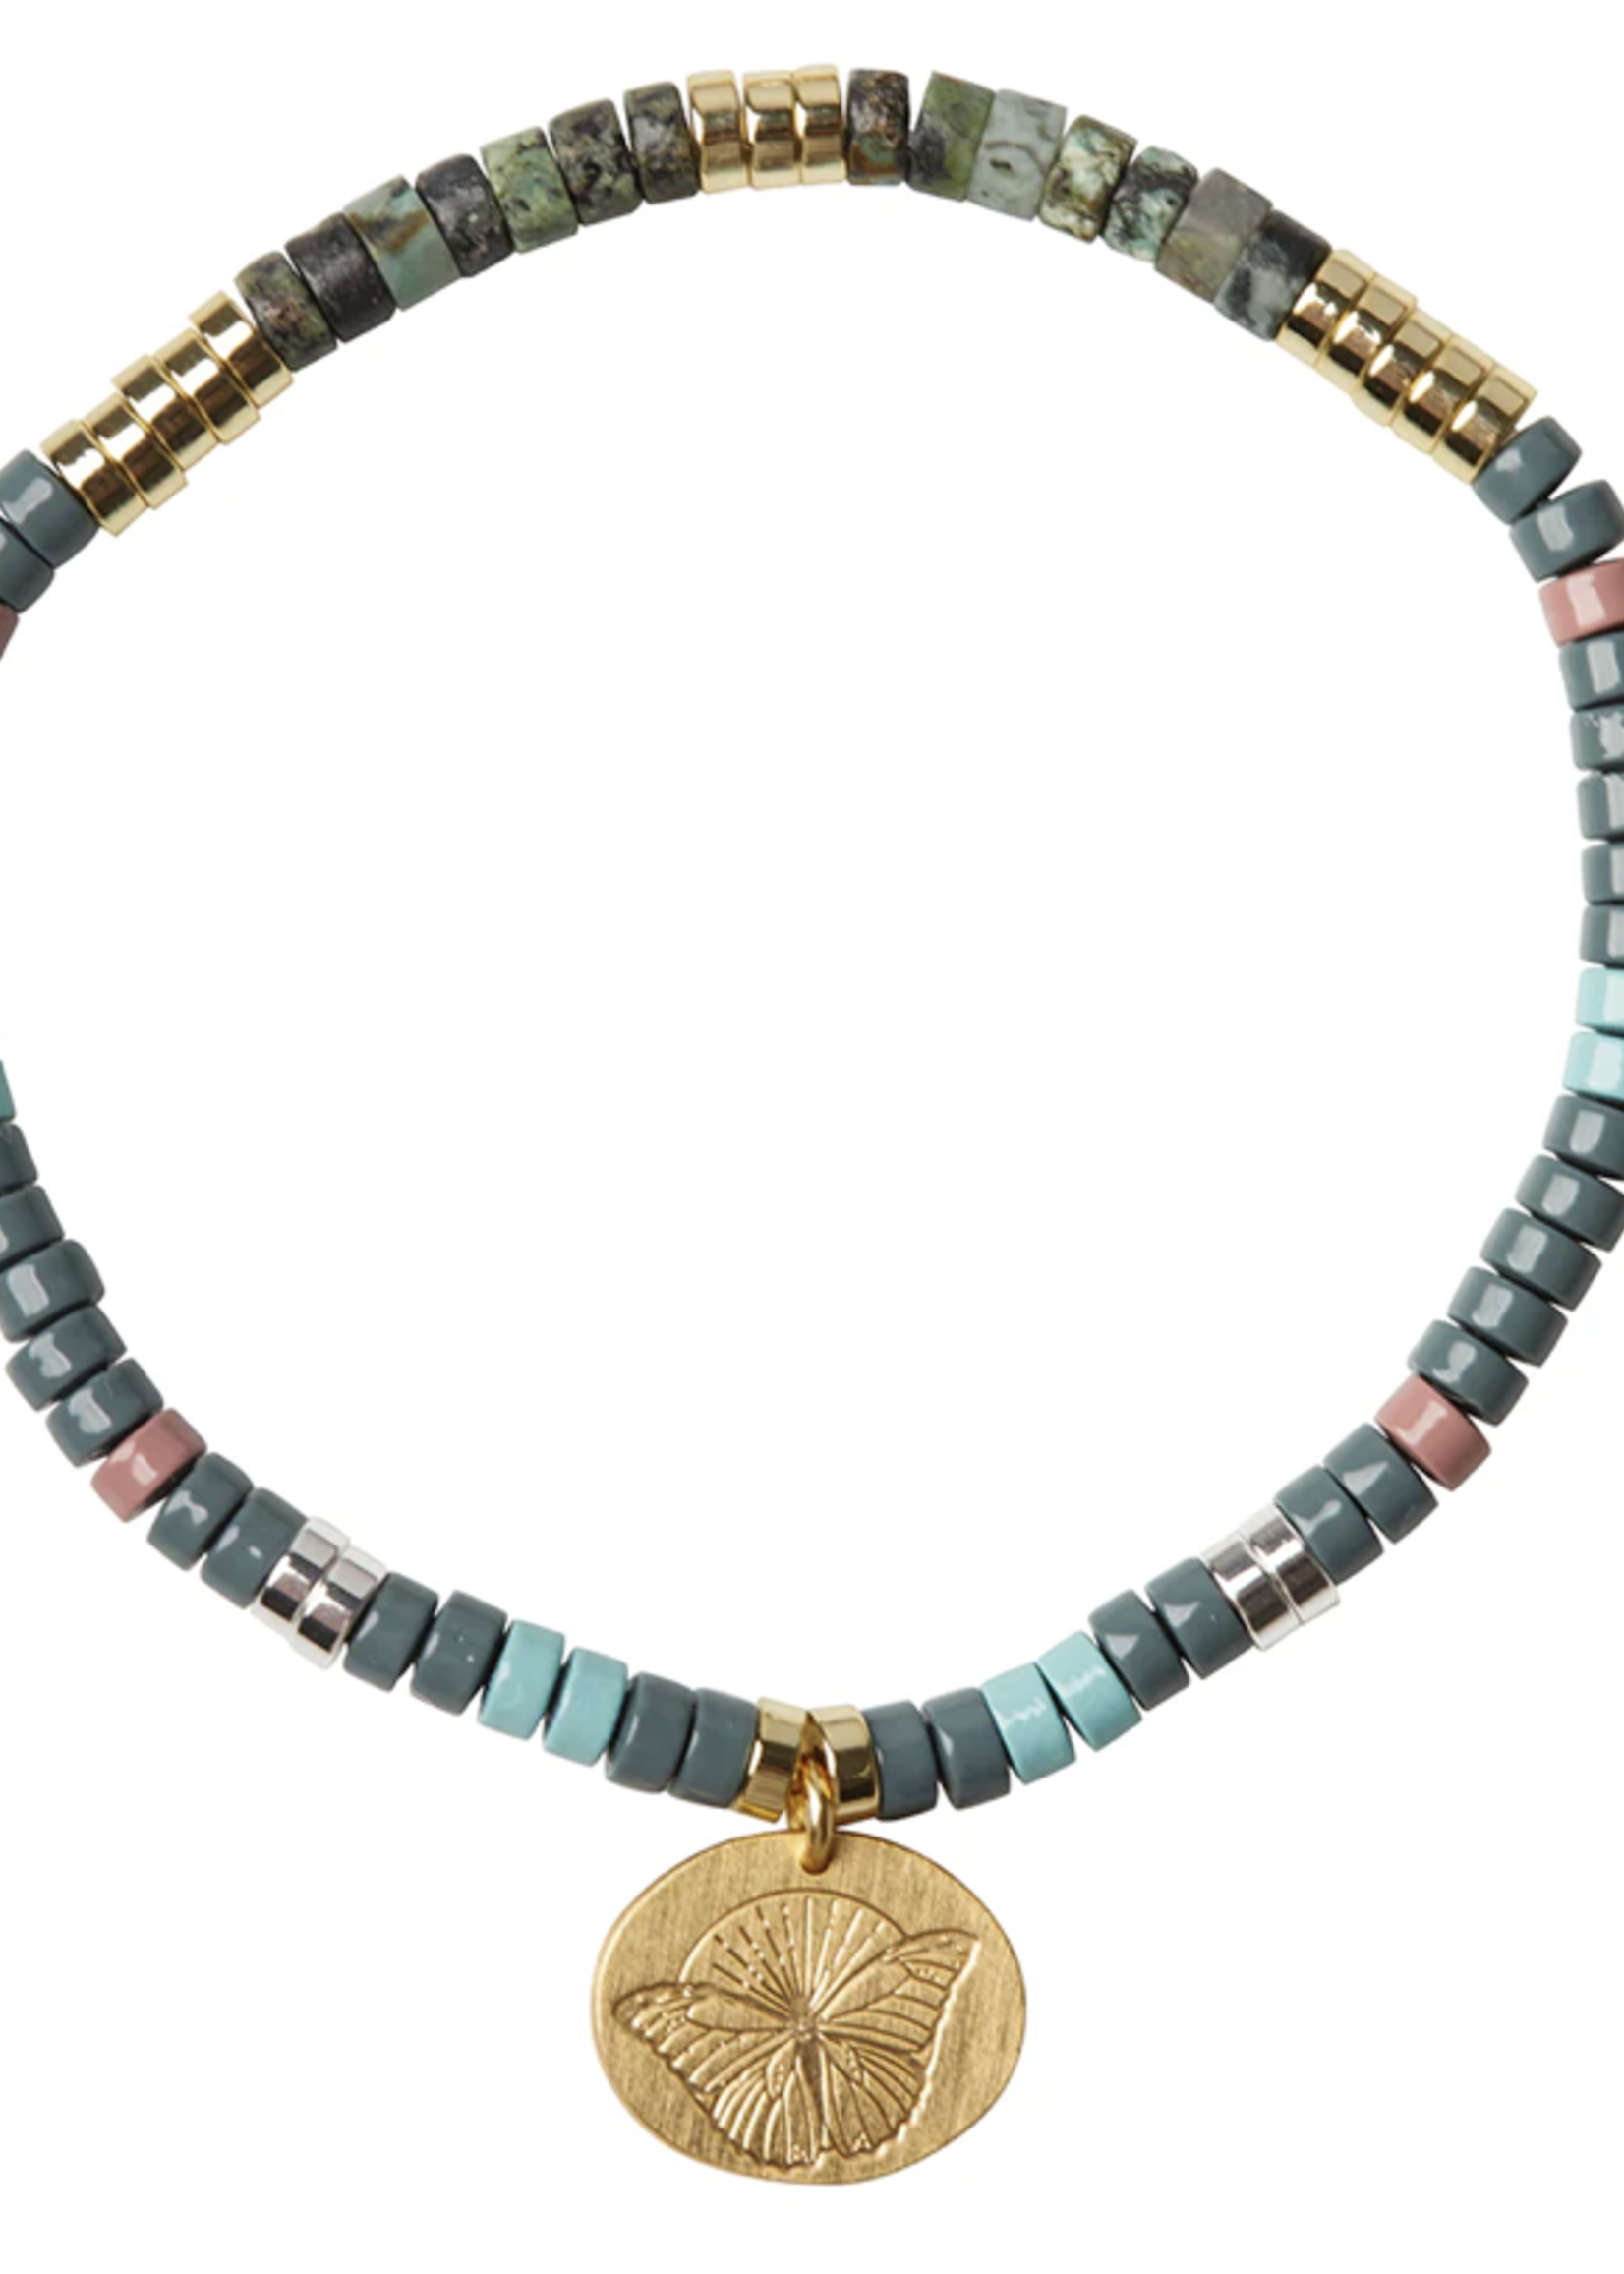 Stone Intention Charm Bracelet - African Turquoise/Silver/Gold